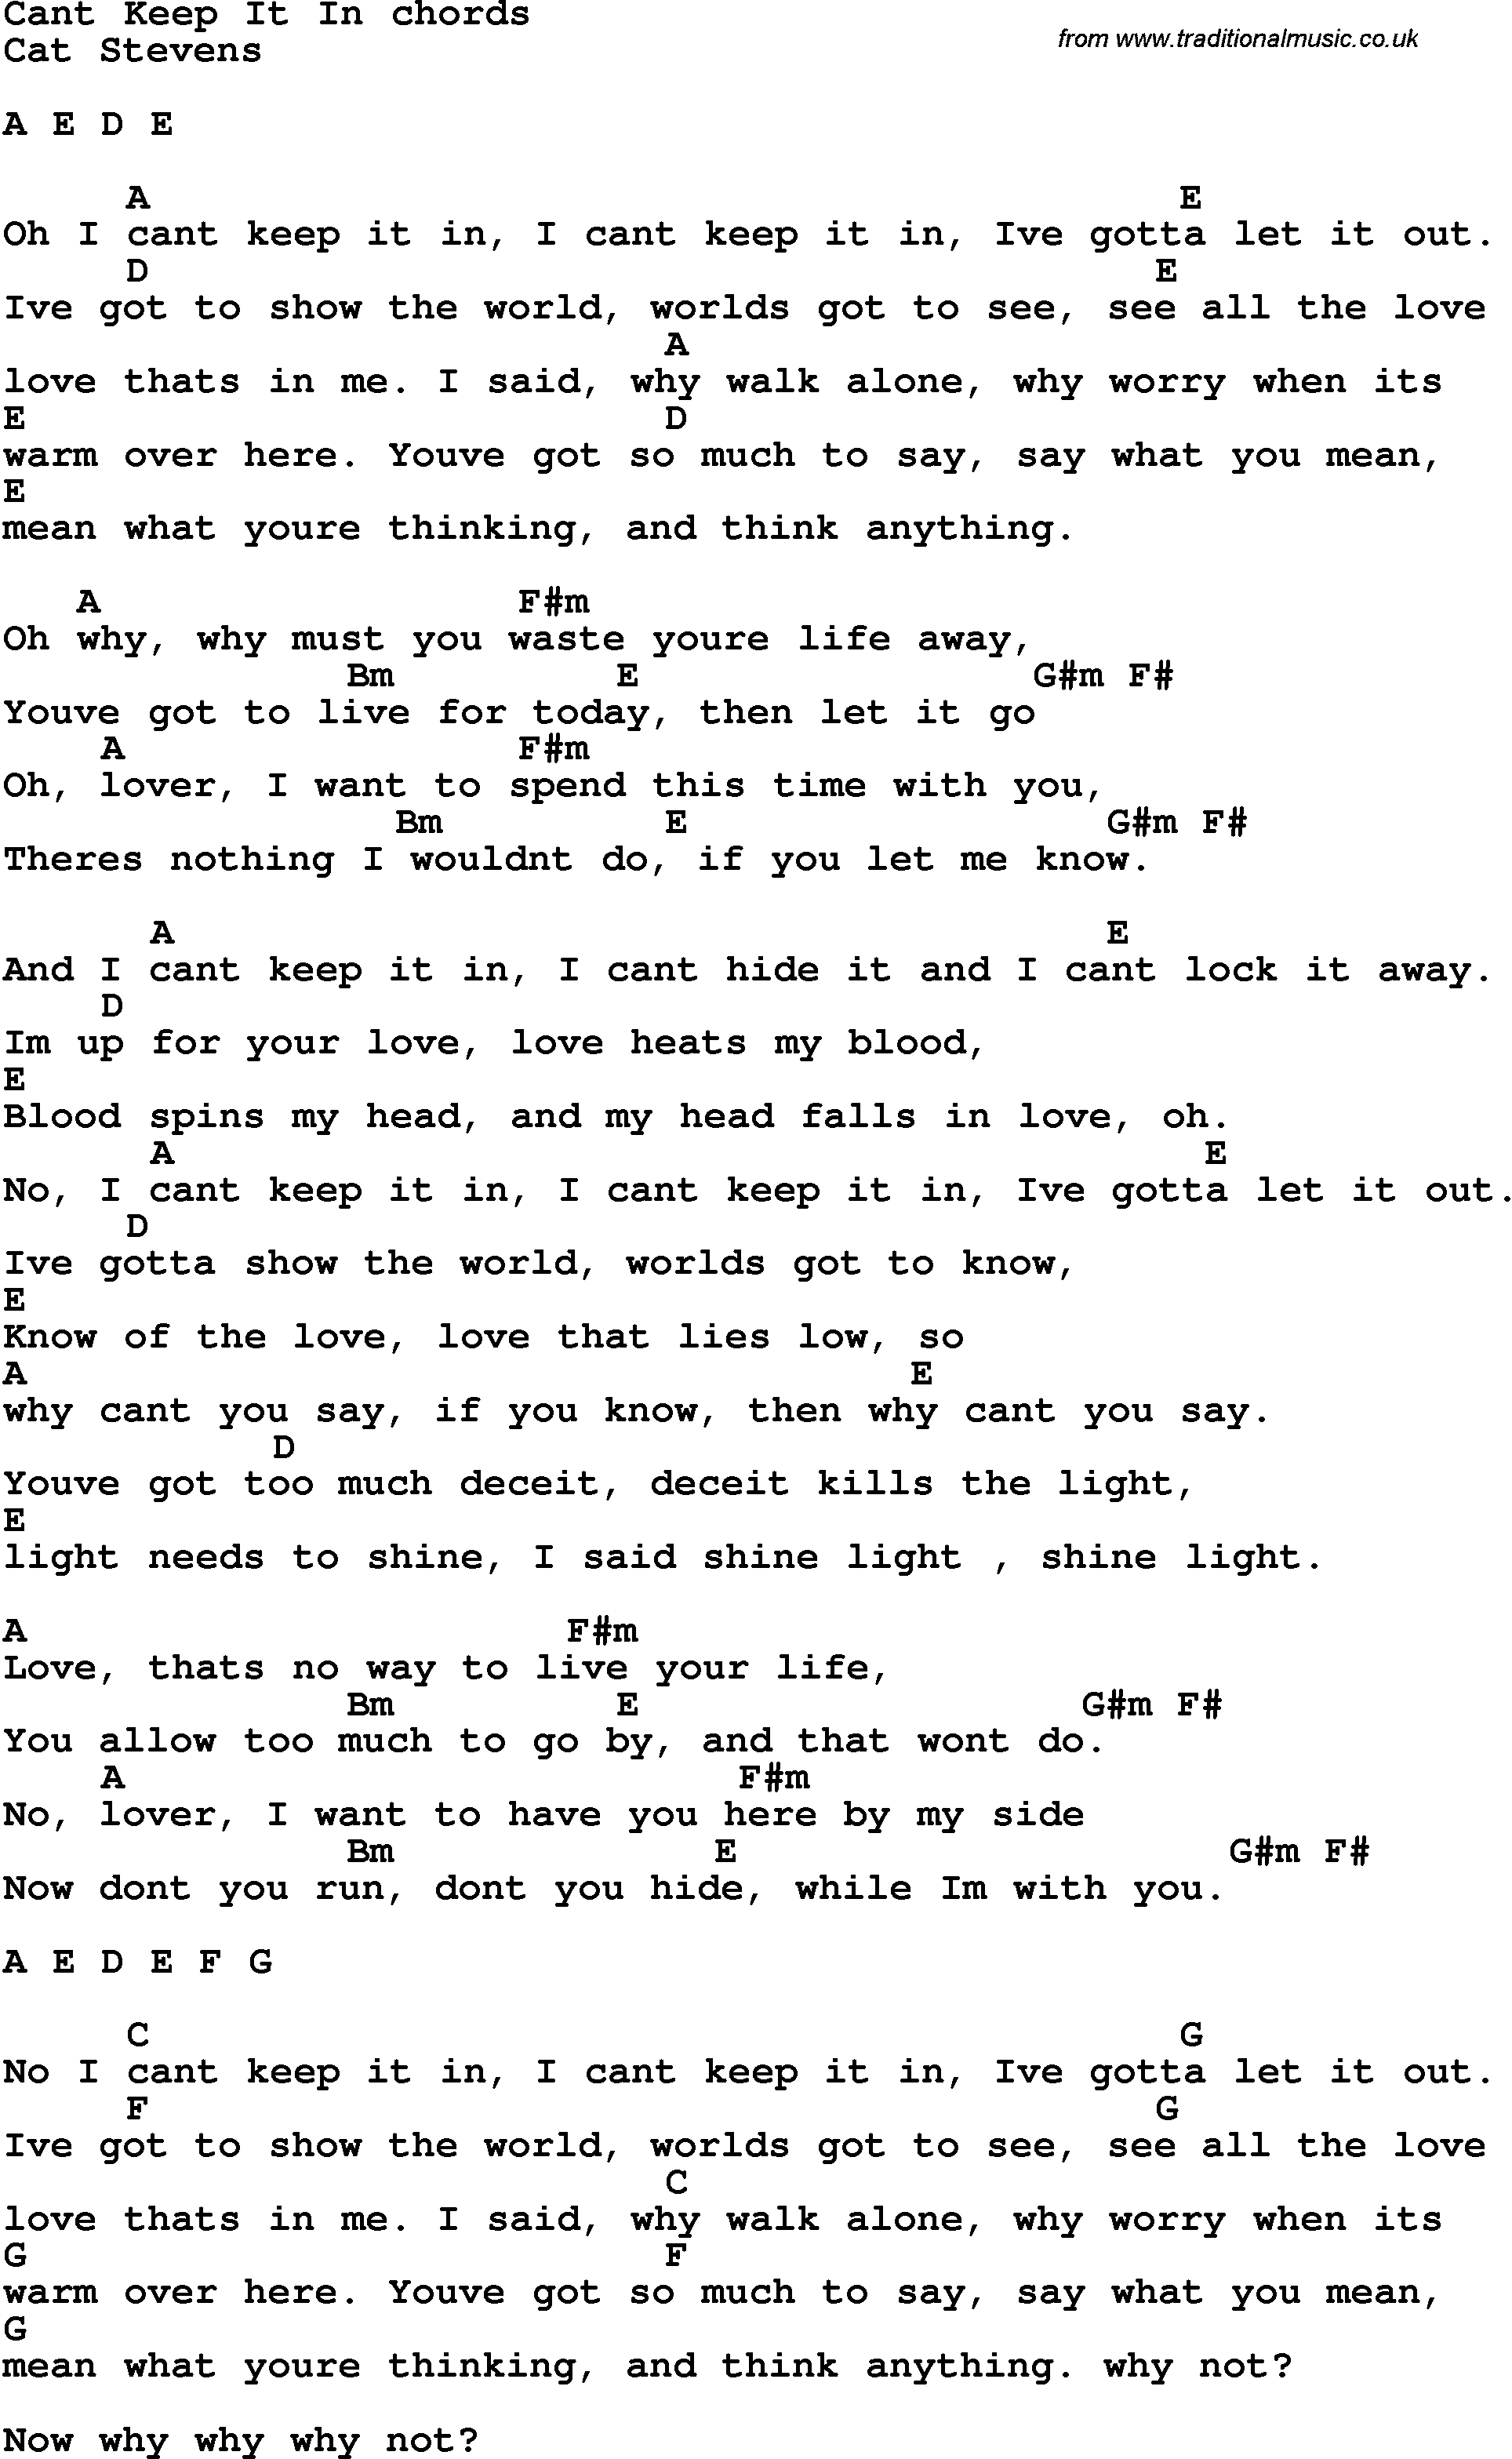 Song Lyrics with guitar chords for Can't Keep It In